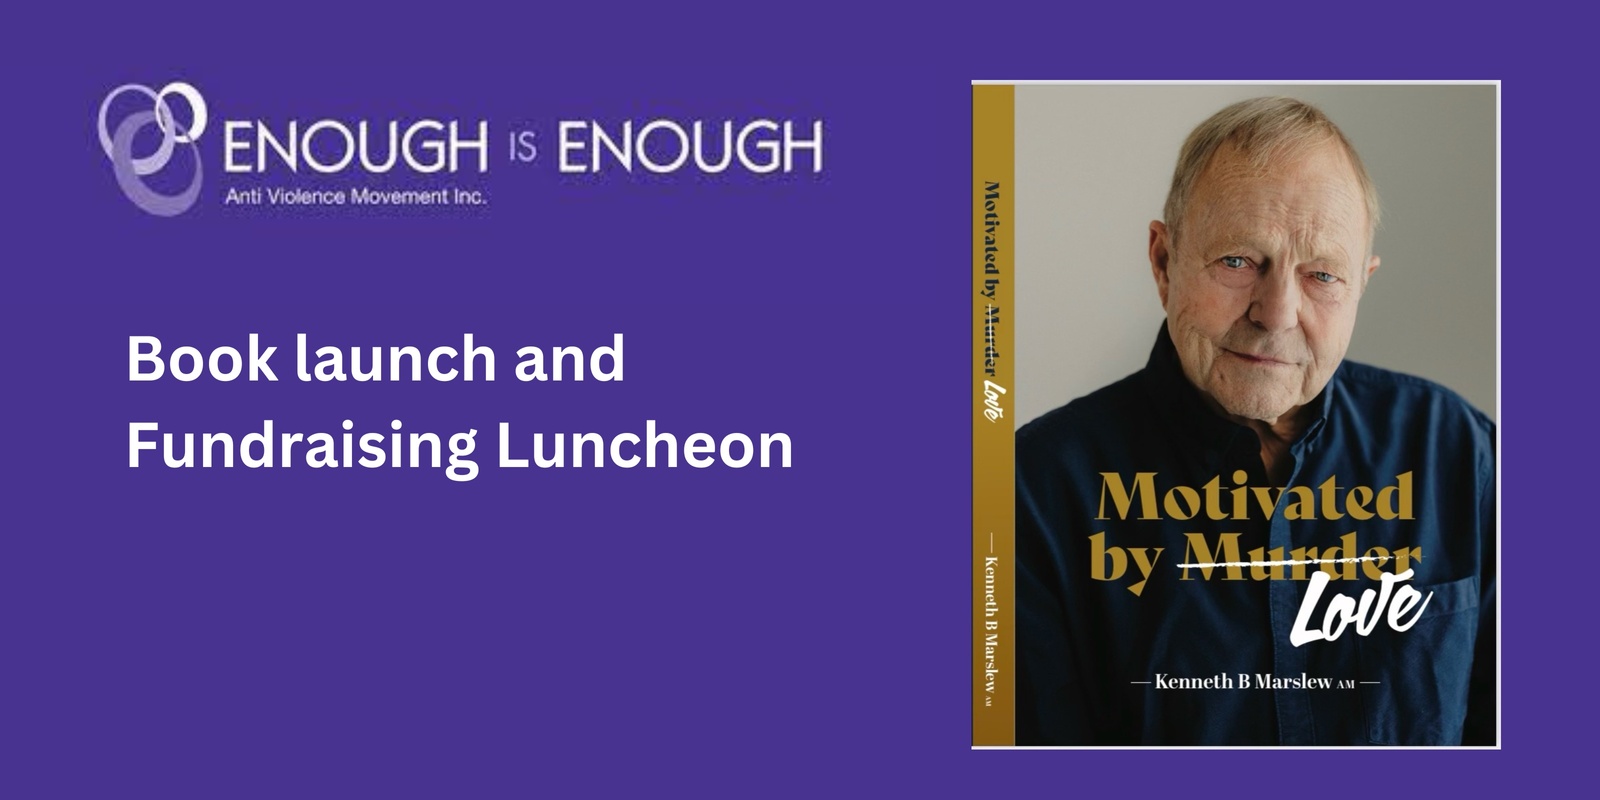 Banner image for Ken Marslew book launch + Enough is Enough Fundraising Luncheon